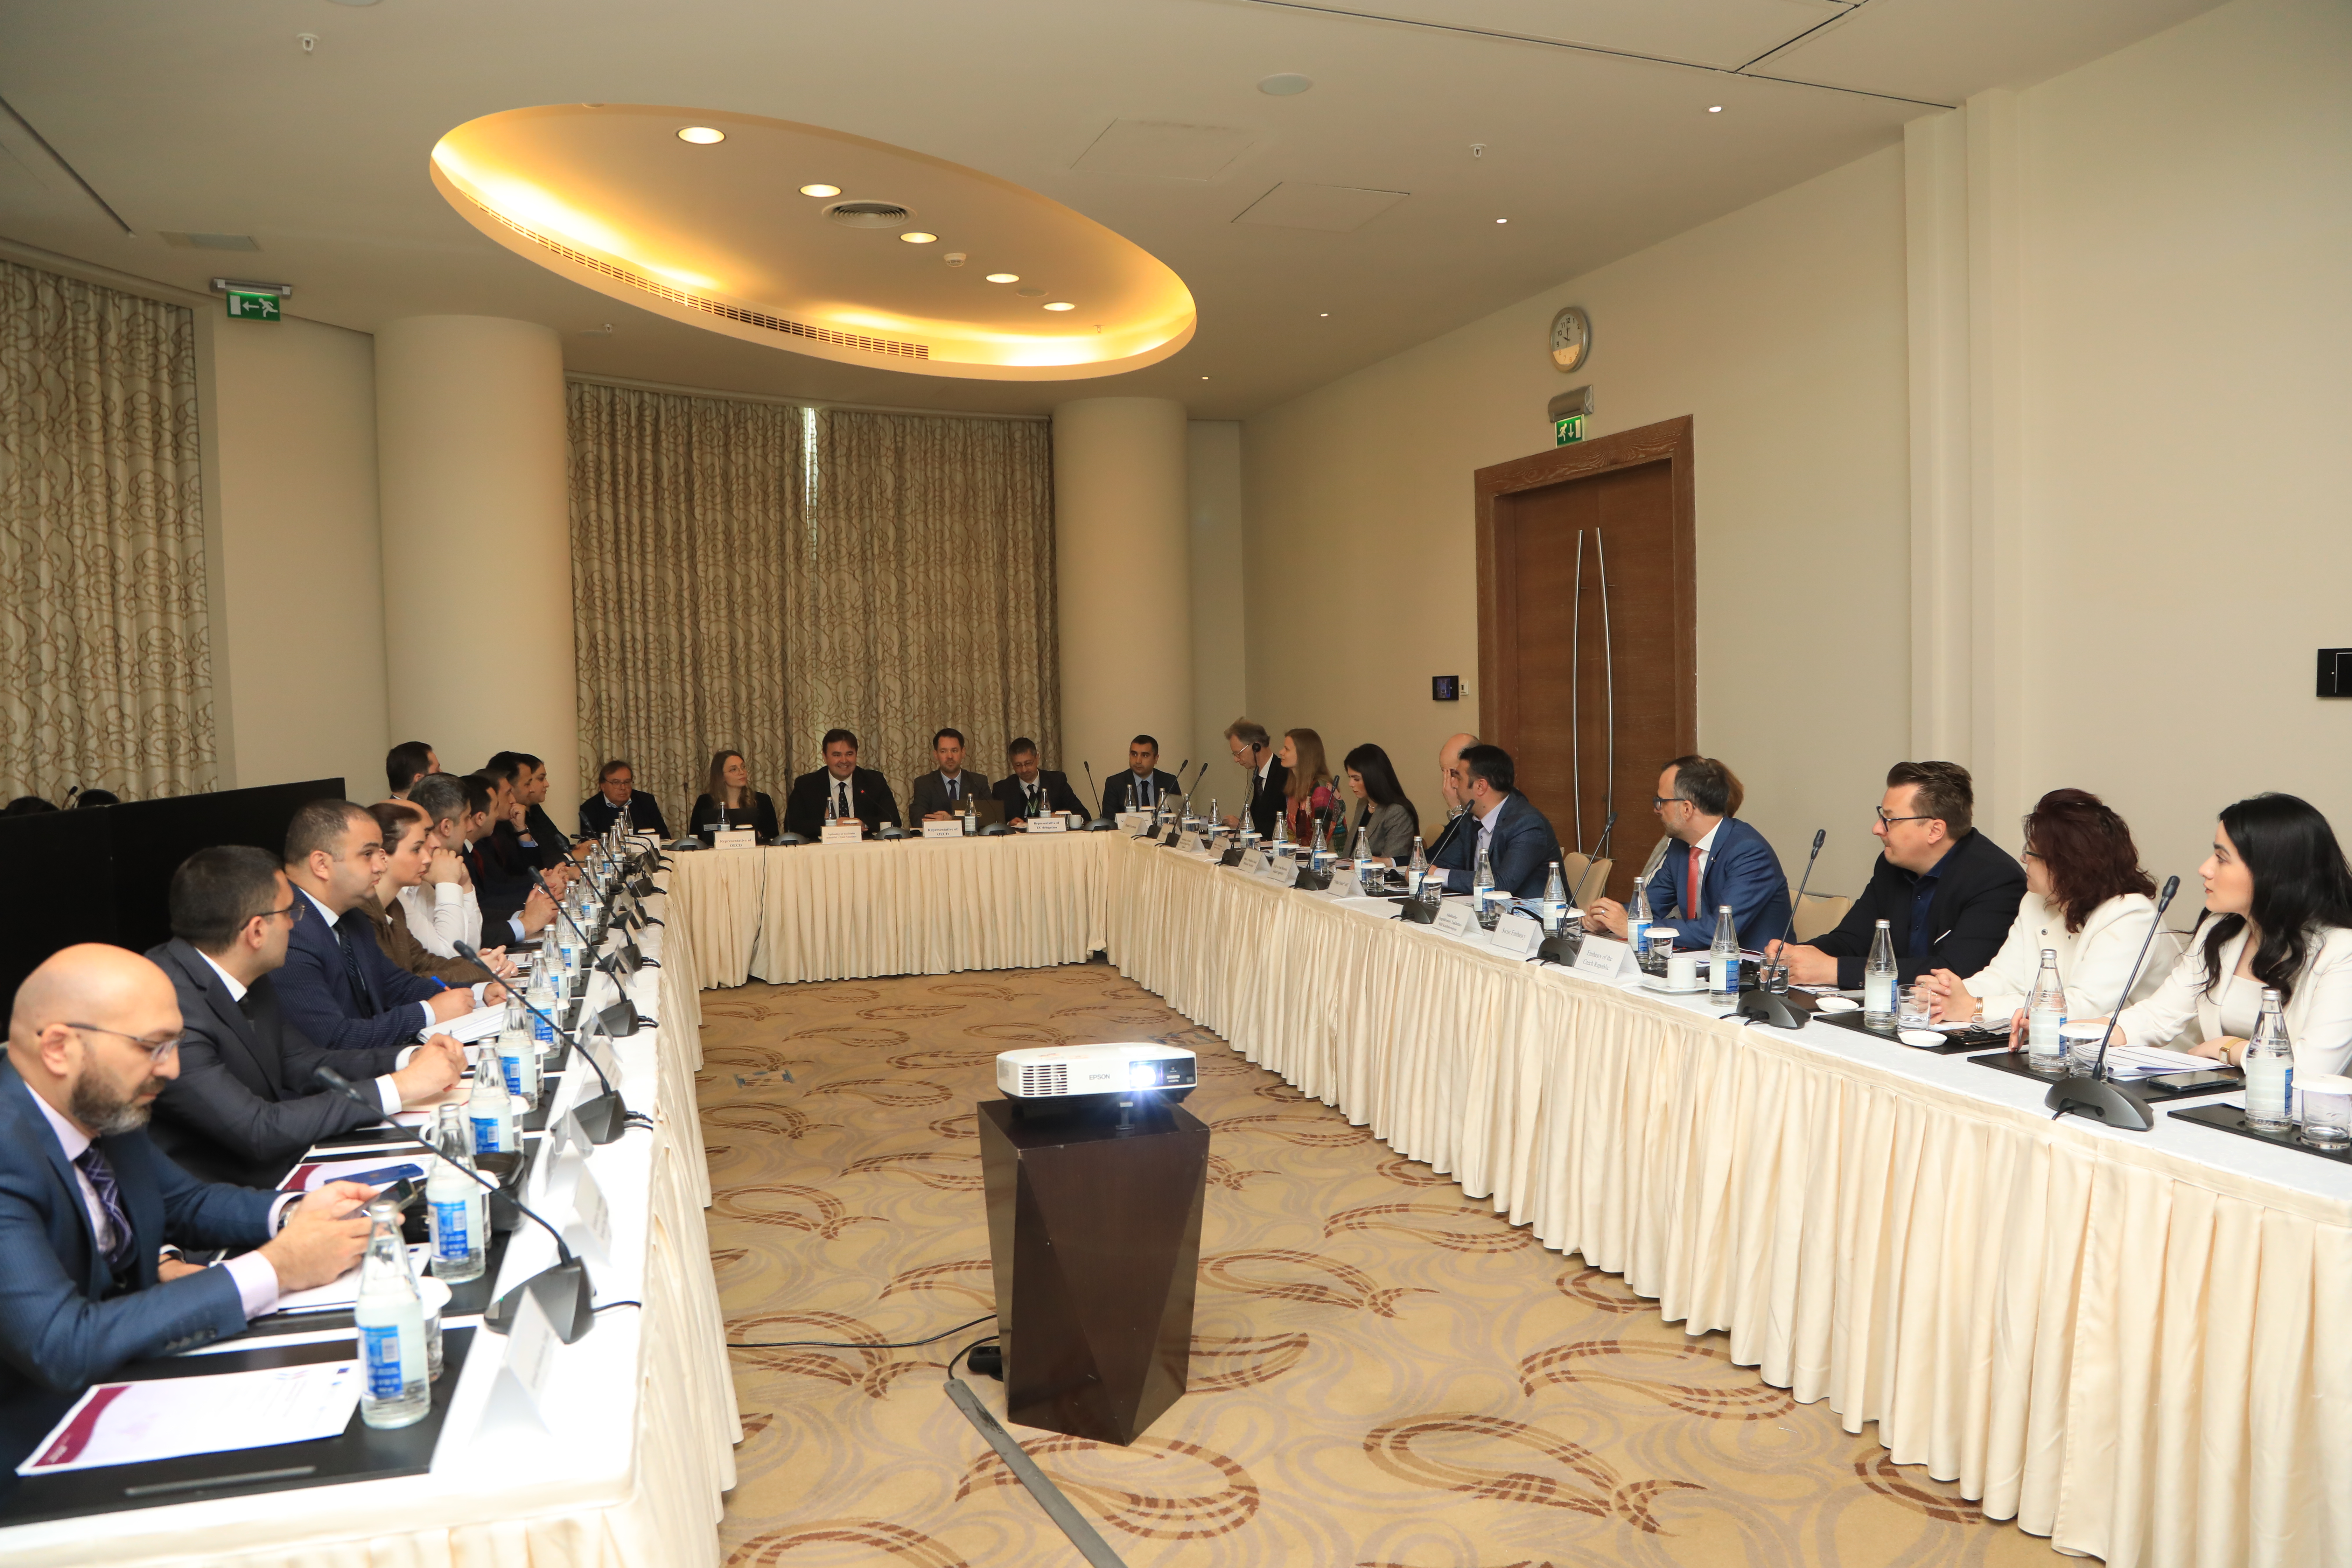 Event held on the assessment of the "Small and Medium Entrepreneurship Policy Index" for Azerbaijan